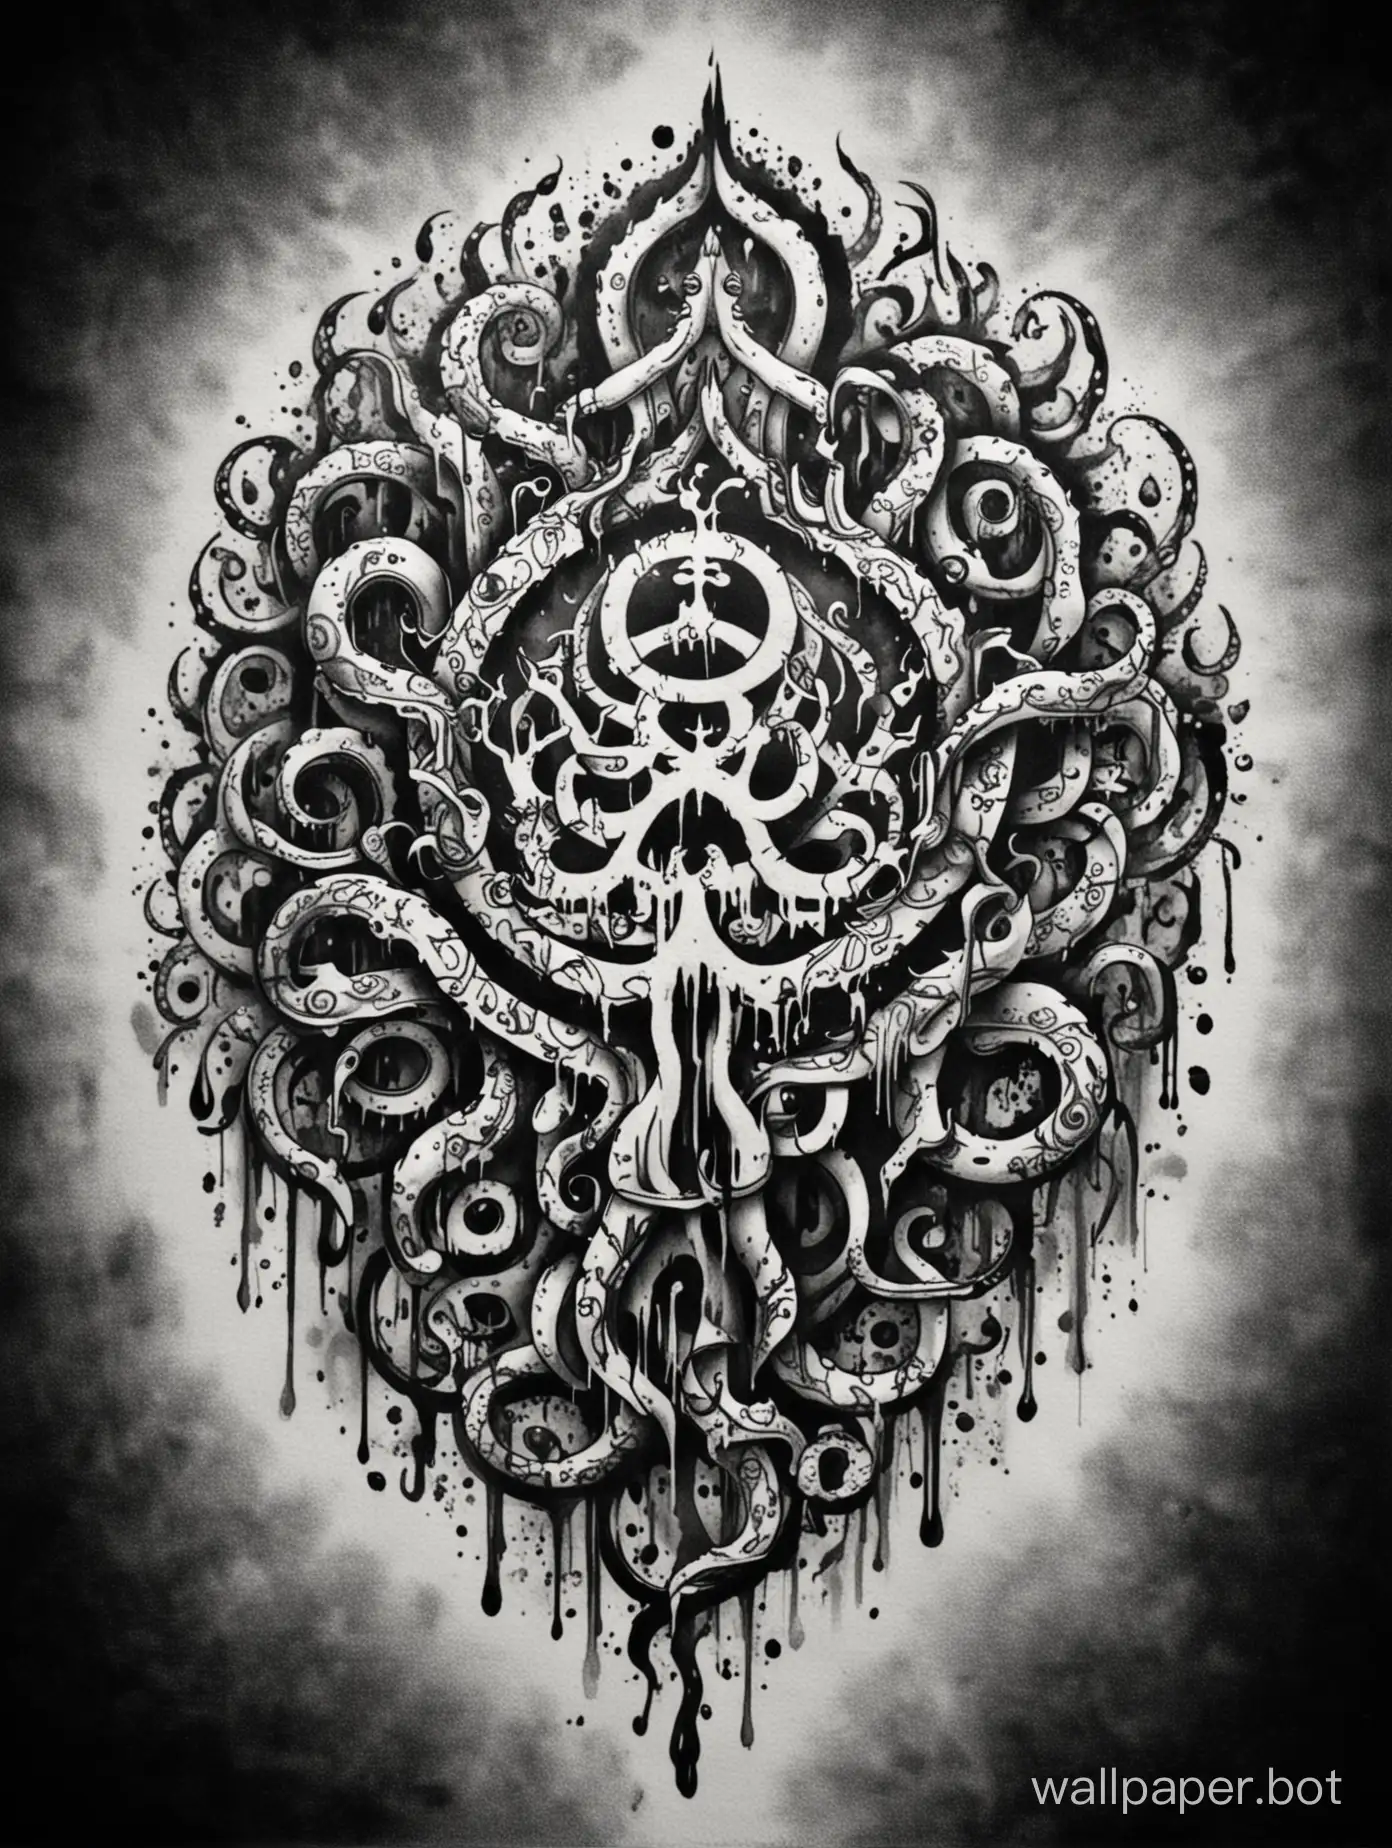 Chaotic-Monochromatic-Aum-Tattoo-Design-with-Dark-Tentacles-Background